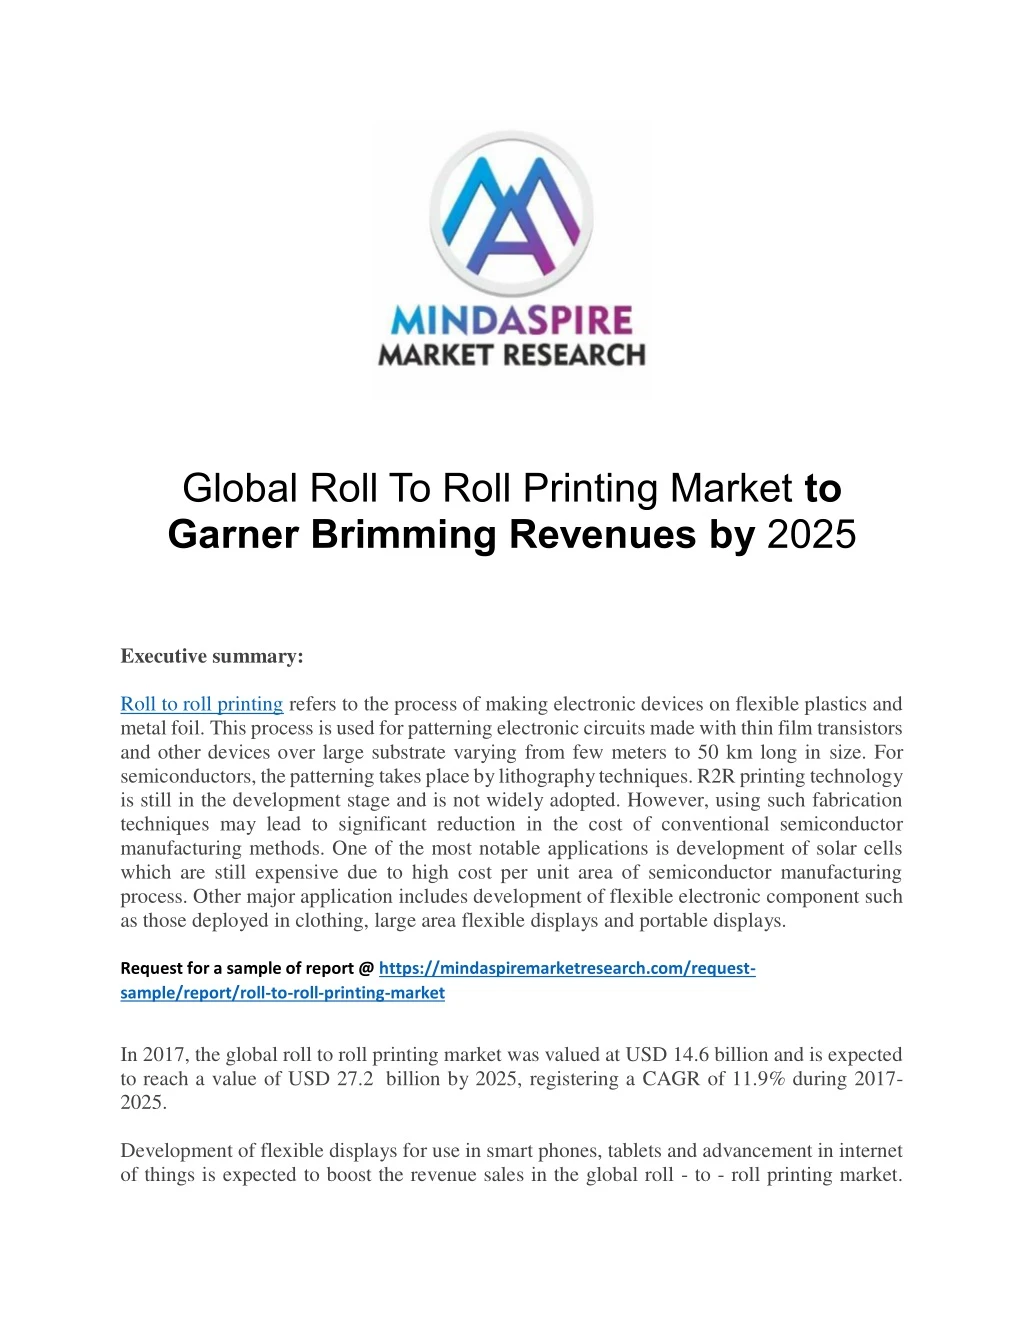 global roll to roll printing market to garner